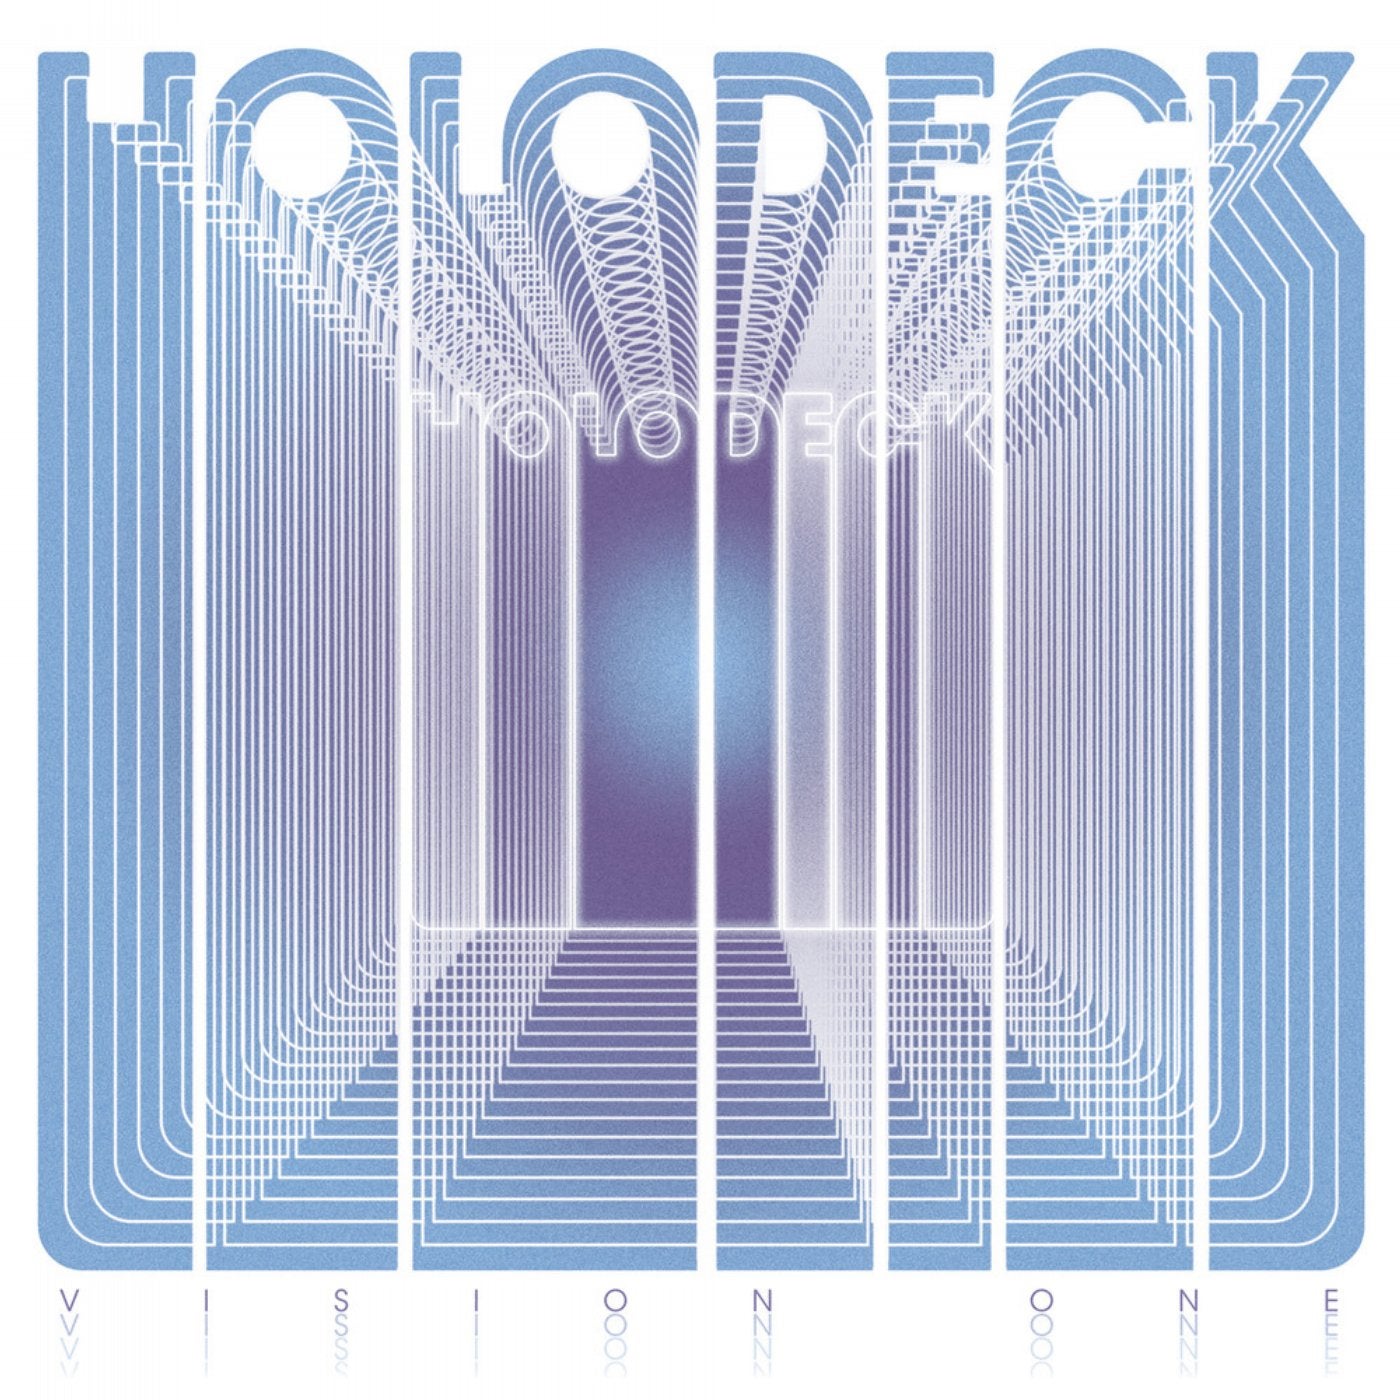 Holodeck Vision One